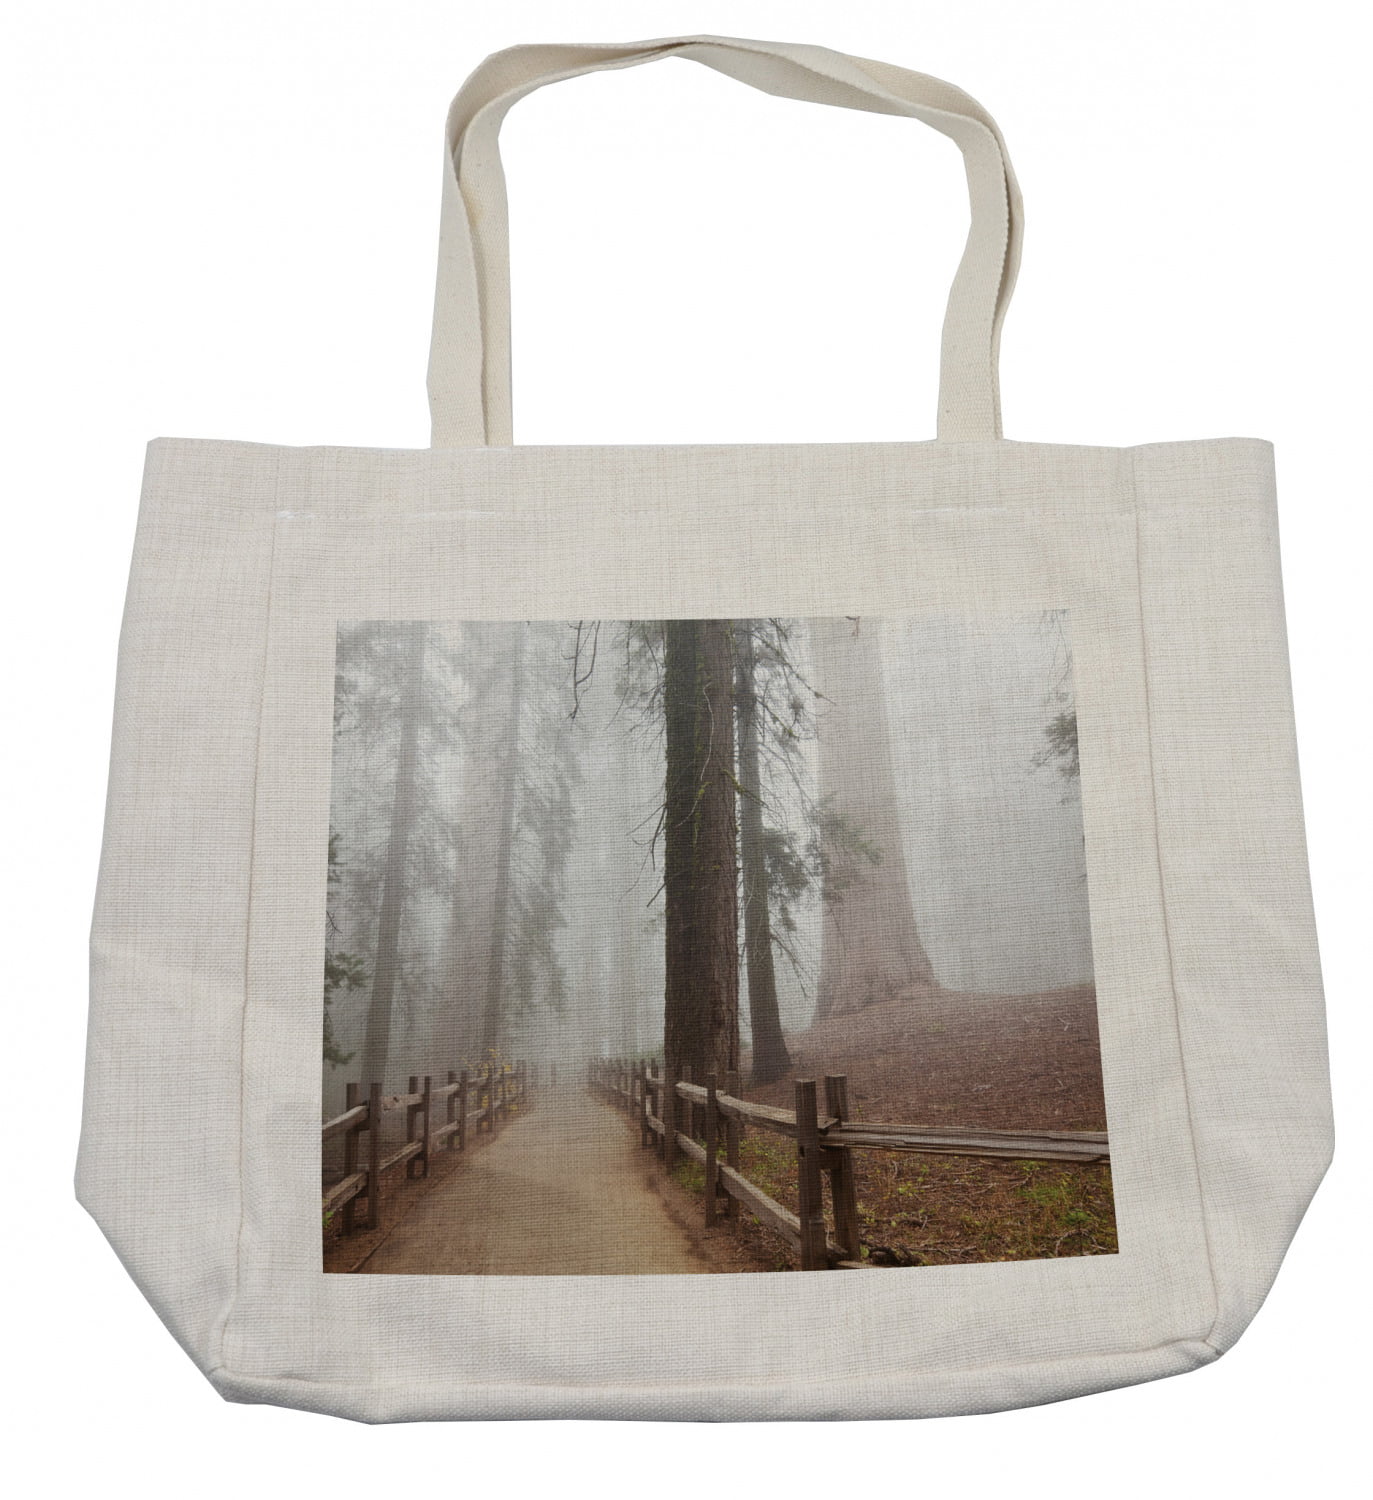 Small luggage tag Apartment Decor Evergreen Forest and Walkway in Sequoia National Park Foggy Morning Nature Art Quickly find the suitcase Grey Brown W2.7 x L4.6